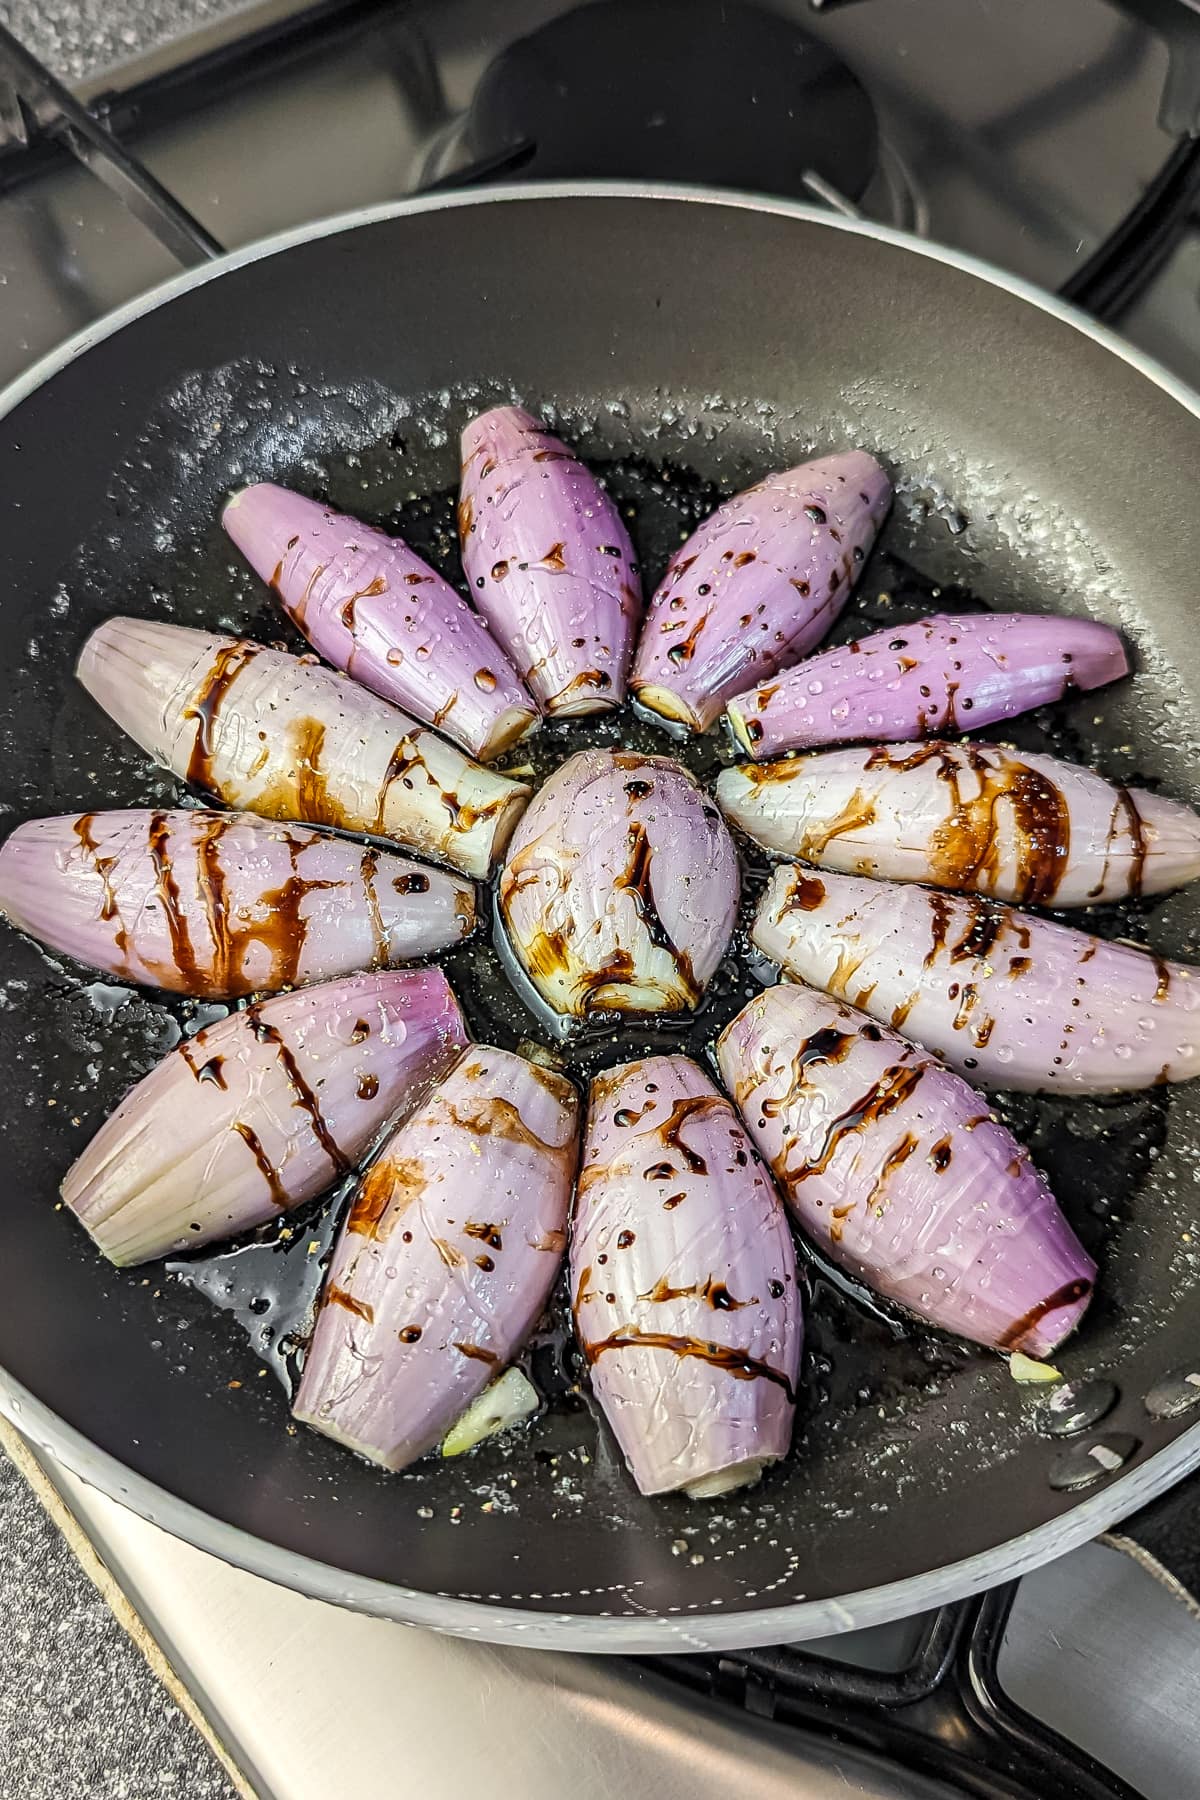 Sliced shallots in a skillet with balsamic glaze, arranged in a circular pattern.